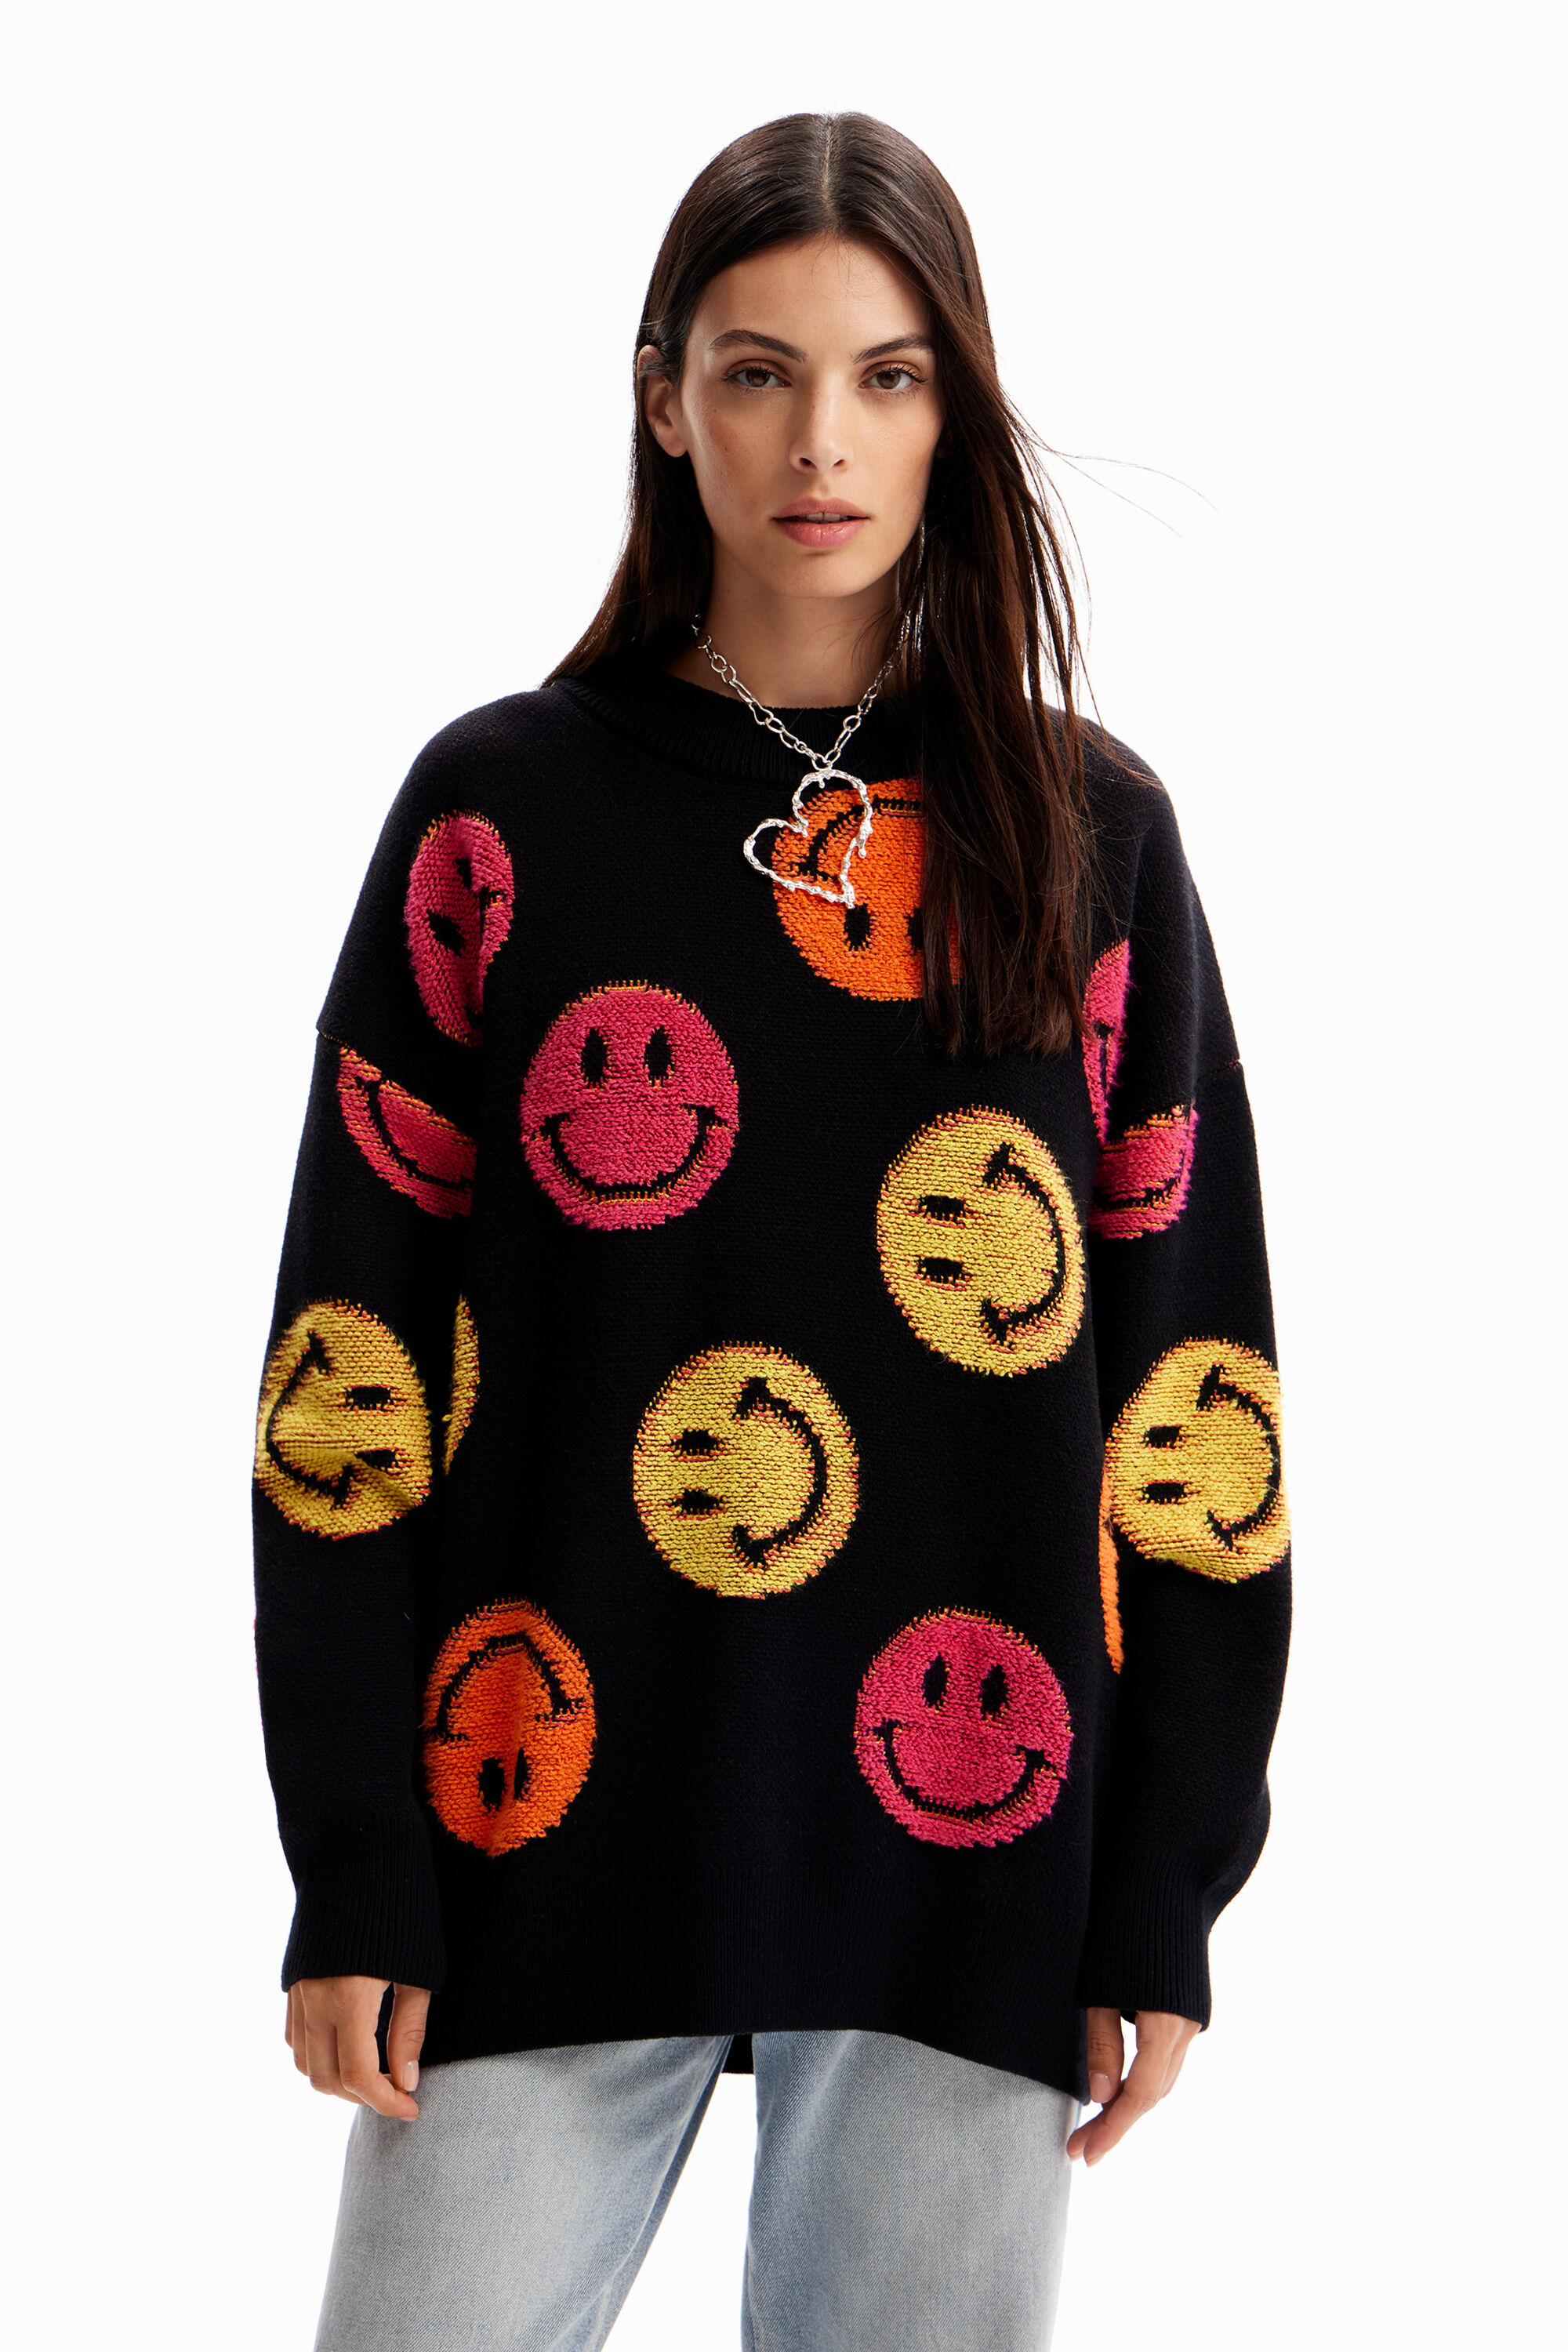 Desigual Oversize Smiley pullover